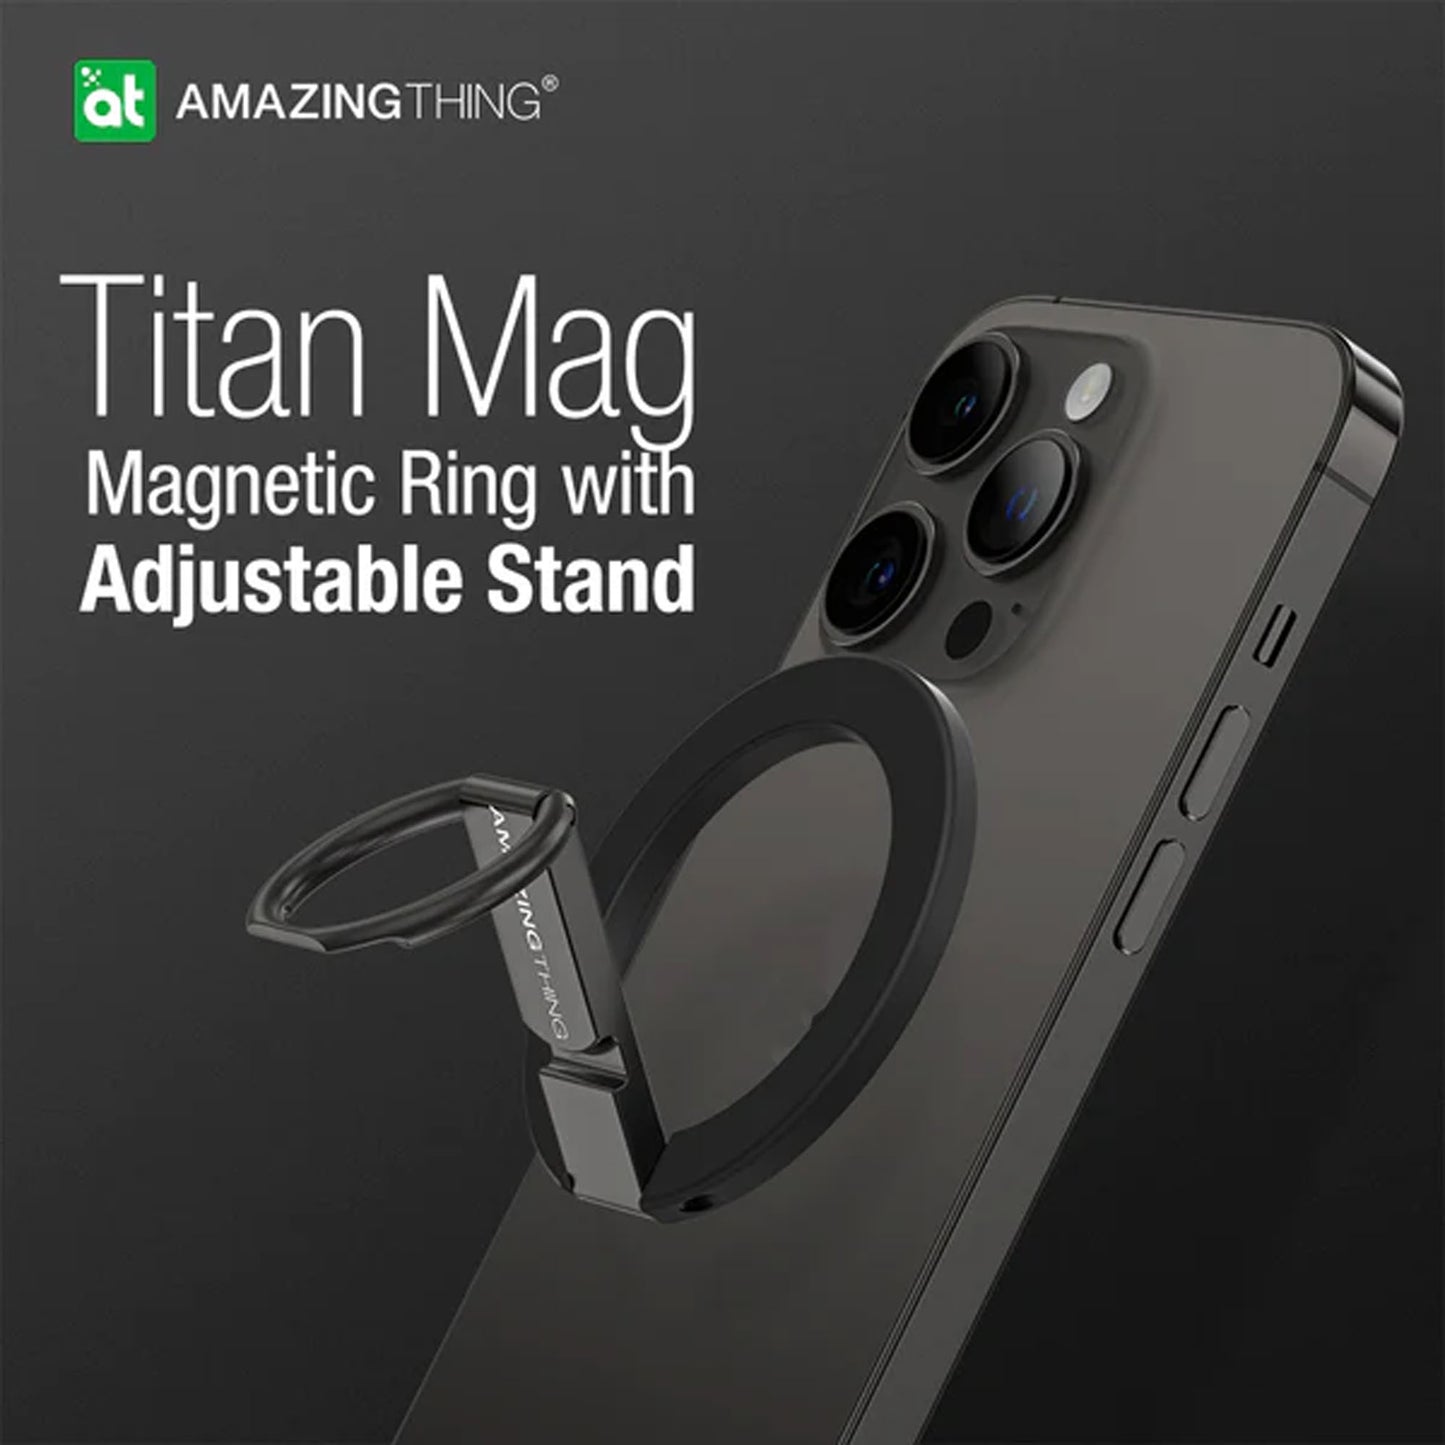 Amazingthing Titan Mag Magnetic Grip with Adjustable Stand - New Pink (Barcode : 4892878077613 )